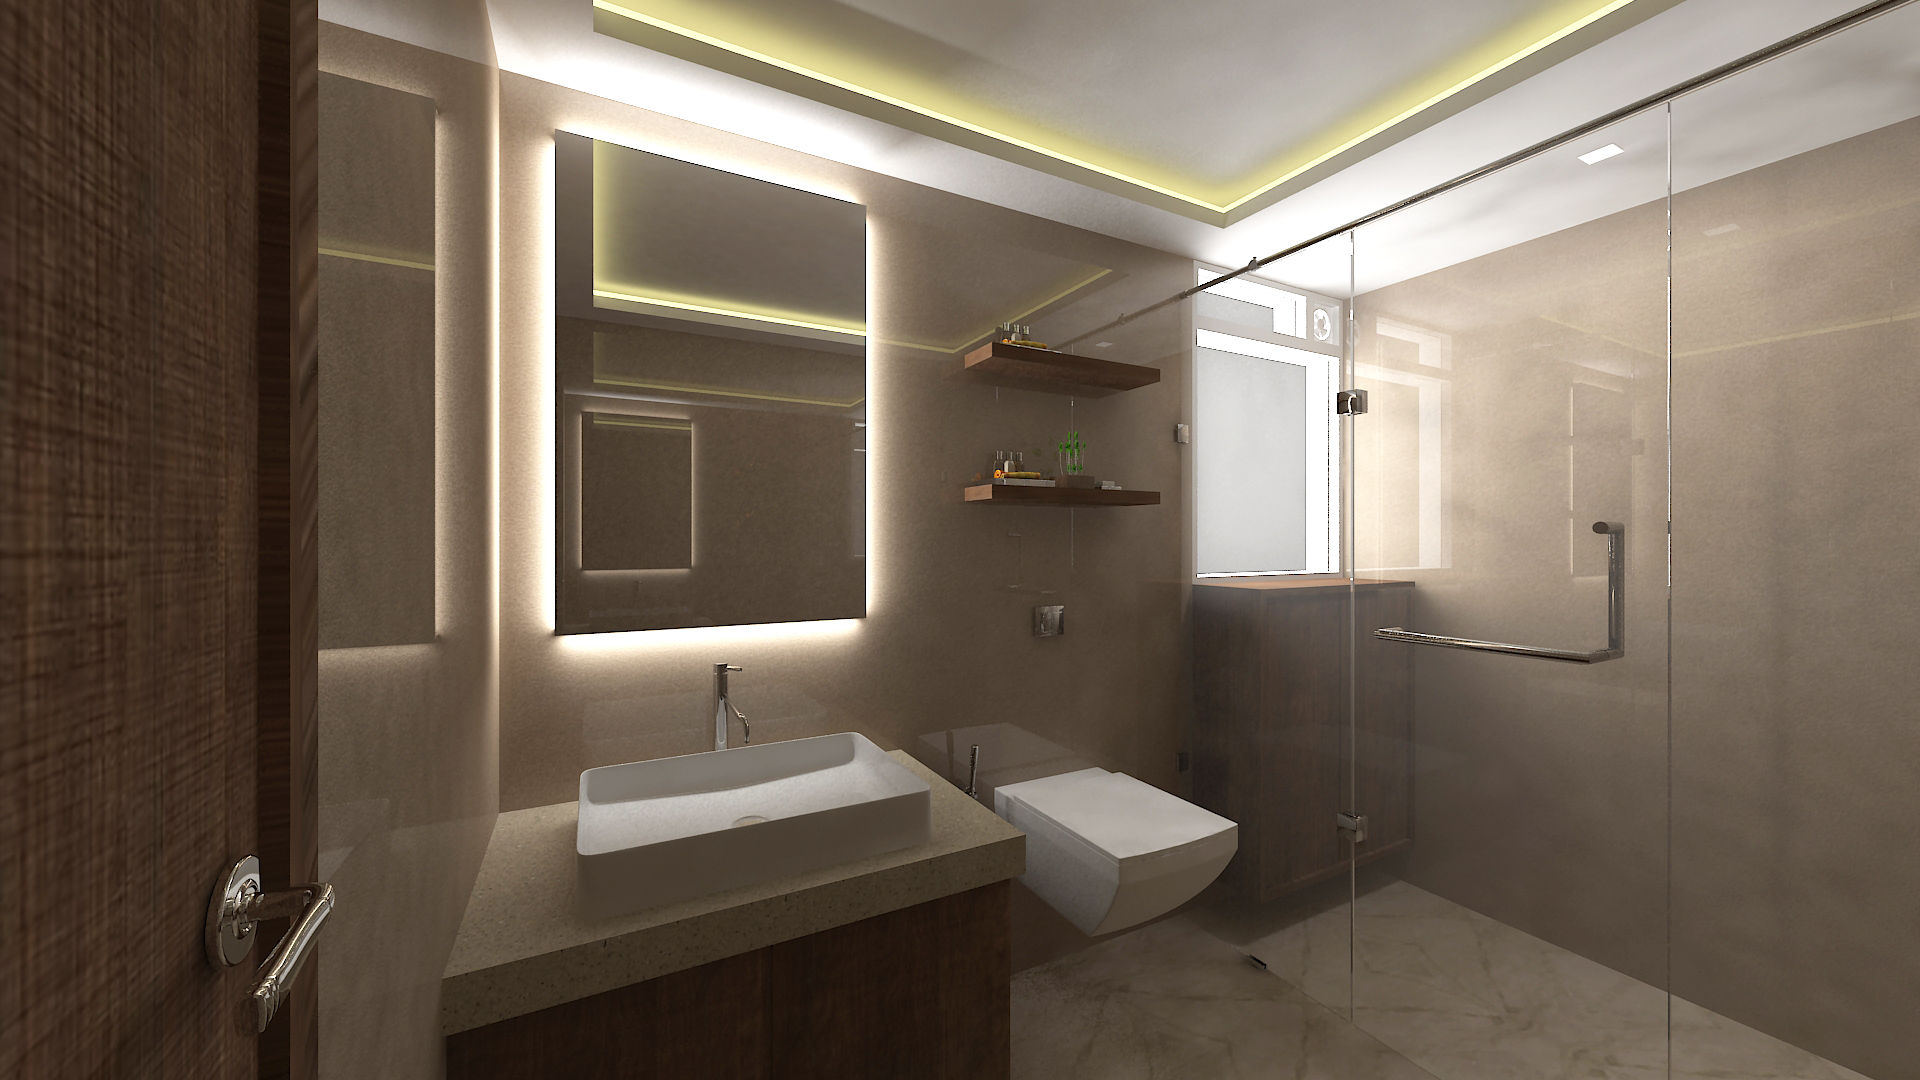 3bhk residence, Nerul Sector 27, SPACE DESIGN STUDIOS SPACE DESIGN STUDIOS Baños de estilo moderno